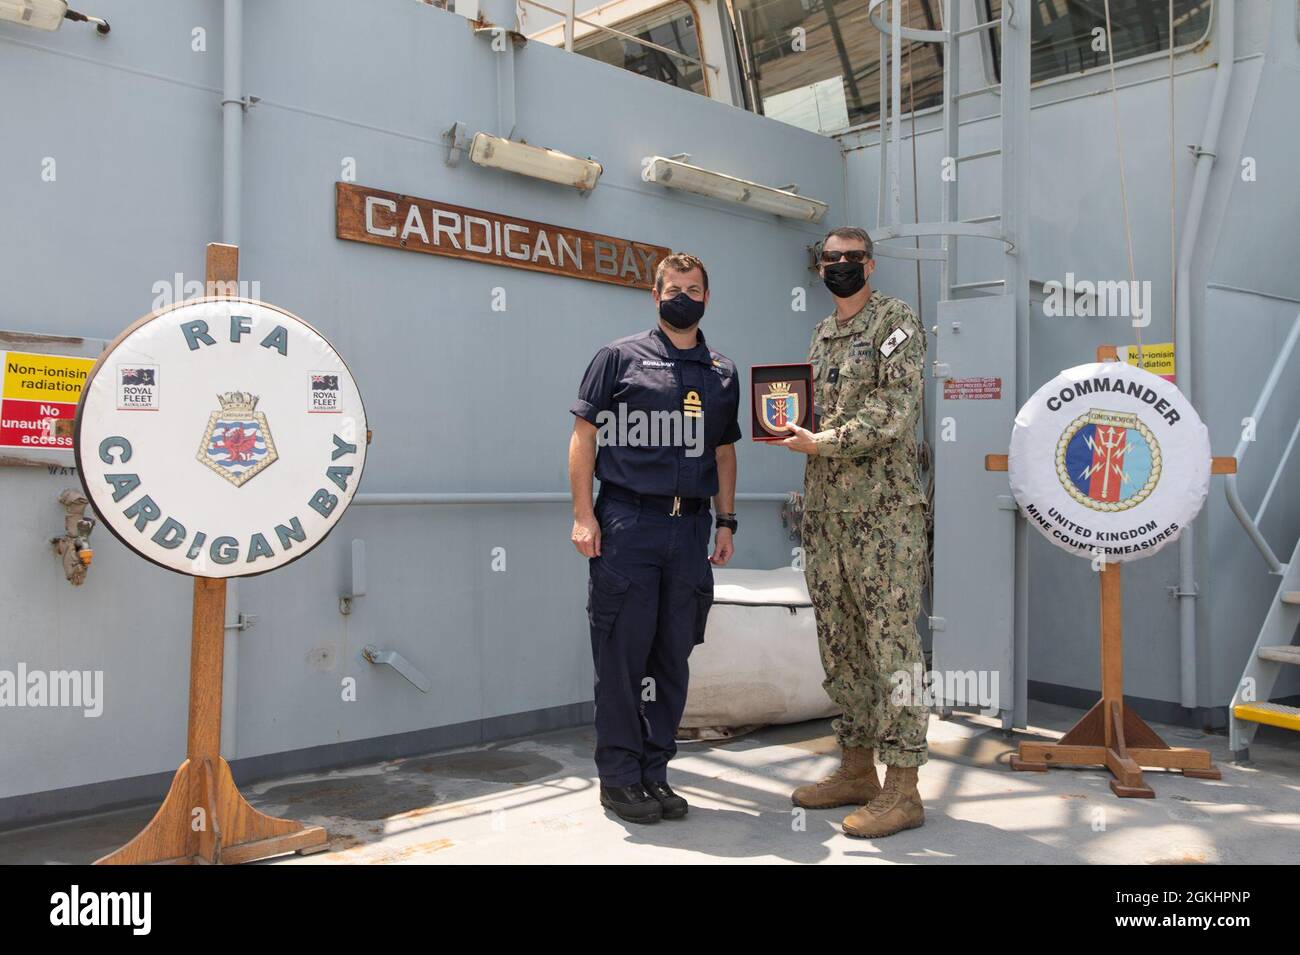 210426-AUN662-1194 ARABIAN GULF (April 26, 2021) – Royal Navy Cmdr. Jim Lovell, commander of Mine Warfare Battlestaff Red, left, presents a gift to Rear Adm. Curt Renshaw, deputy commander of U.S. Naval Forces Central Command and U.S. 5th Fleet, aboard Royal Fleet Auxiliary landing ship dock RFA Cardigan Bay (L 3009) after a mine countermeasures capability brief during exercise Artemis Trident 21 in the Arabian Gulf, April 26. Artemis Trident 21 is a multilateral mine countermeasures exercise between the UK, Australia, France and U.S., designed to enhance mutual interoperability and capabiliti Stock Photo